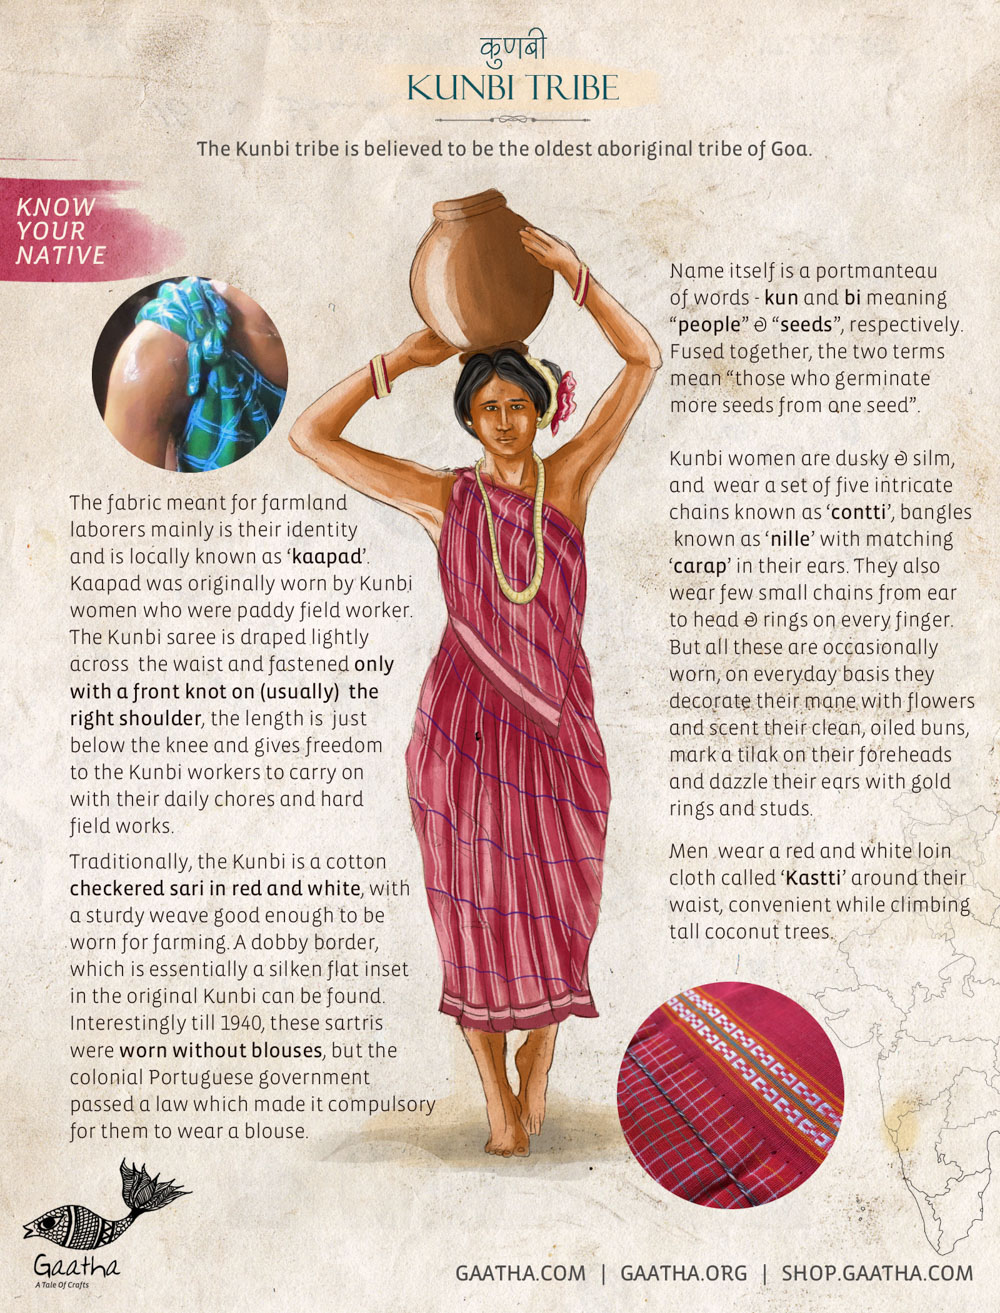 Kunbi Tribe is believed to be the oldest aboriginal tribe of Goa, India.